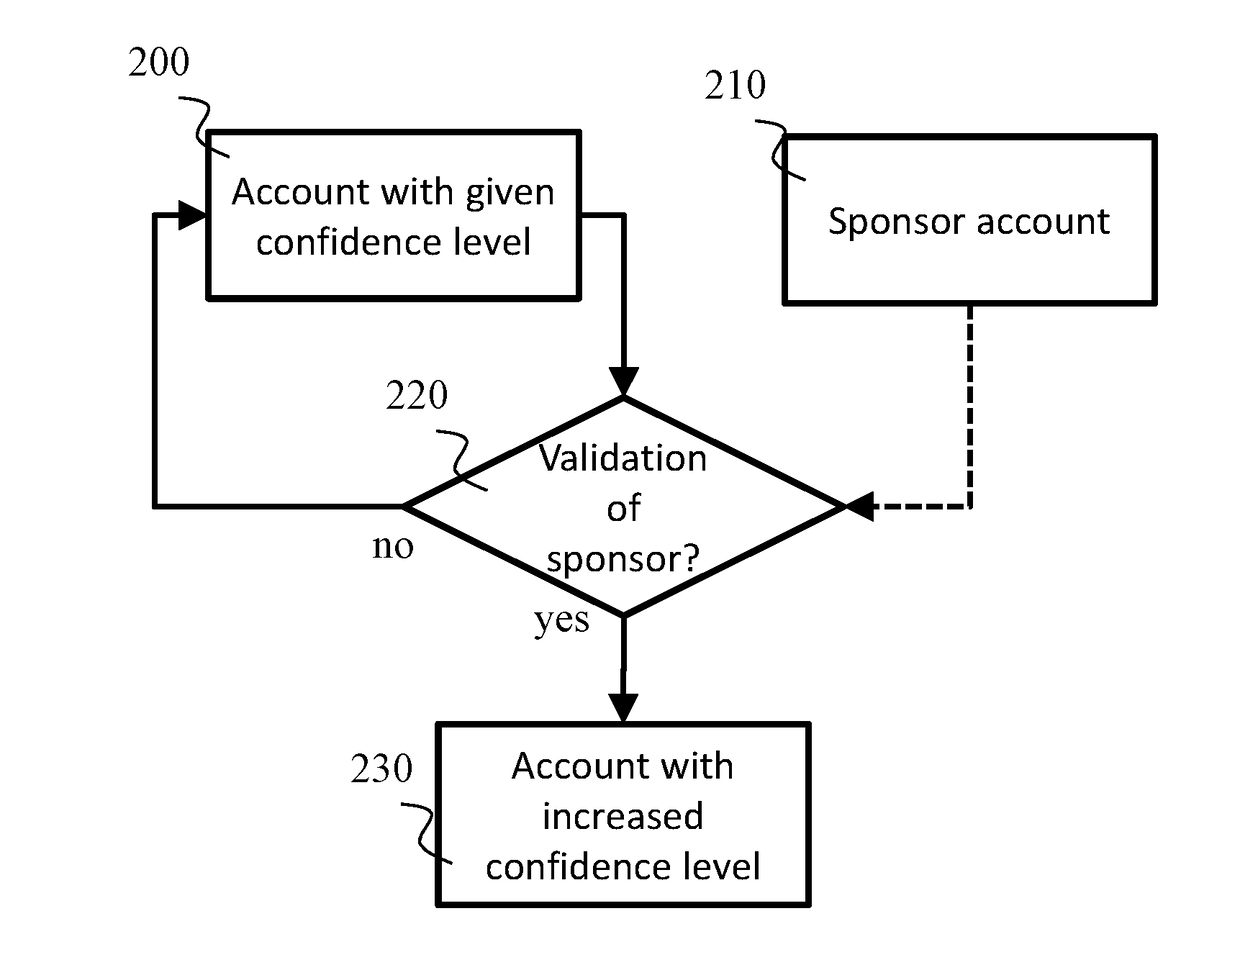 Method for checking a parameter indicating a confidence level associated with a user account of an online service